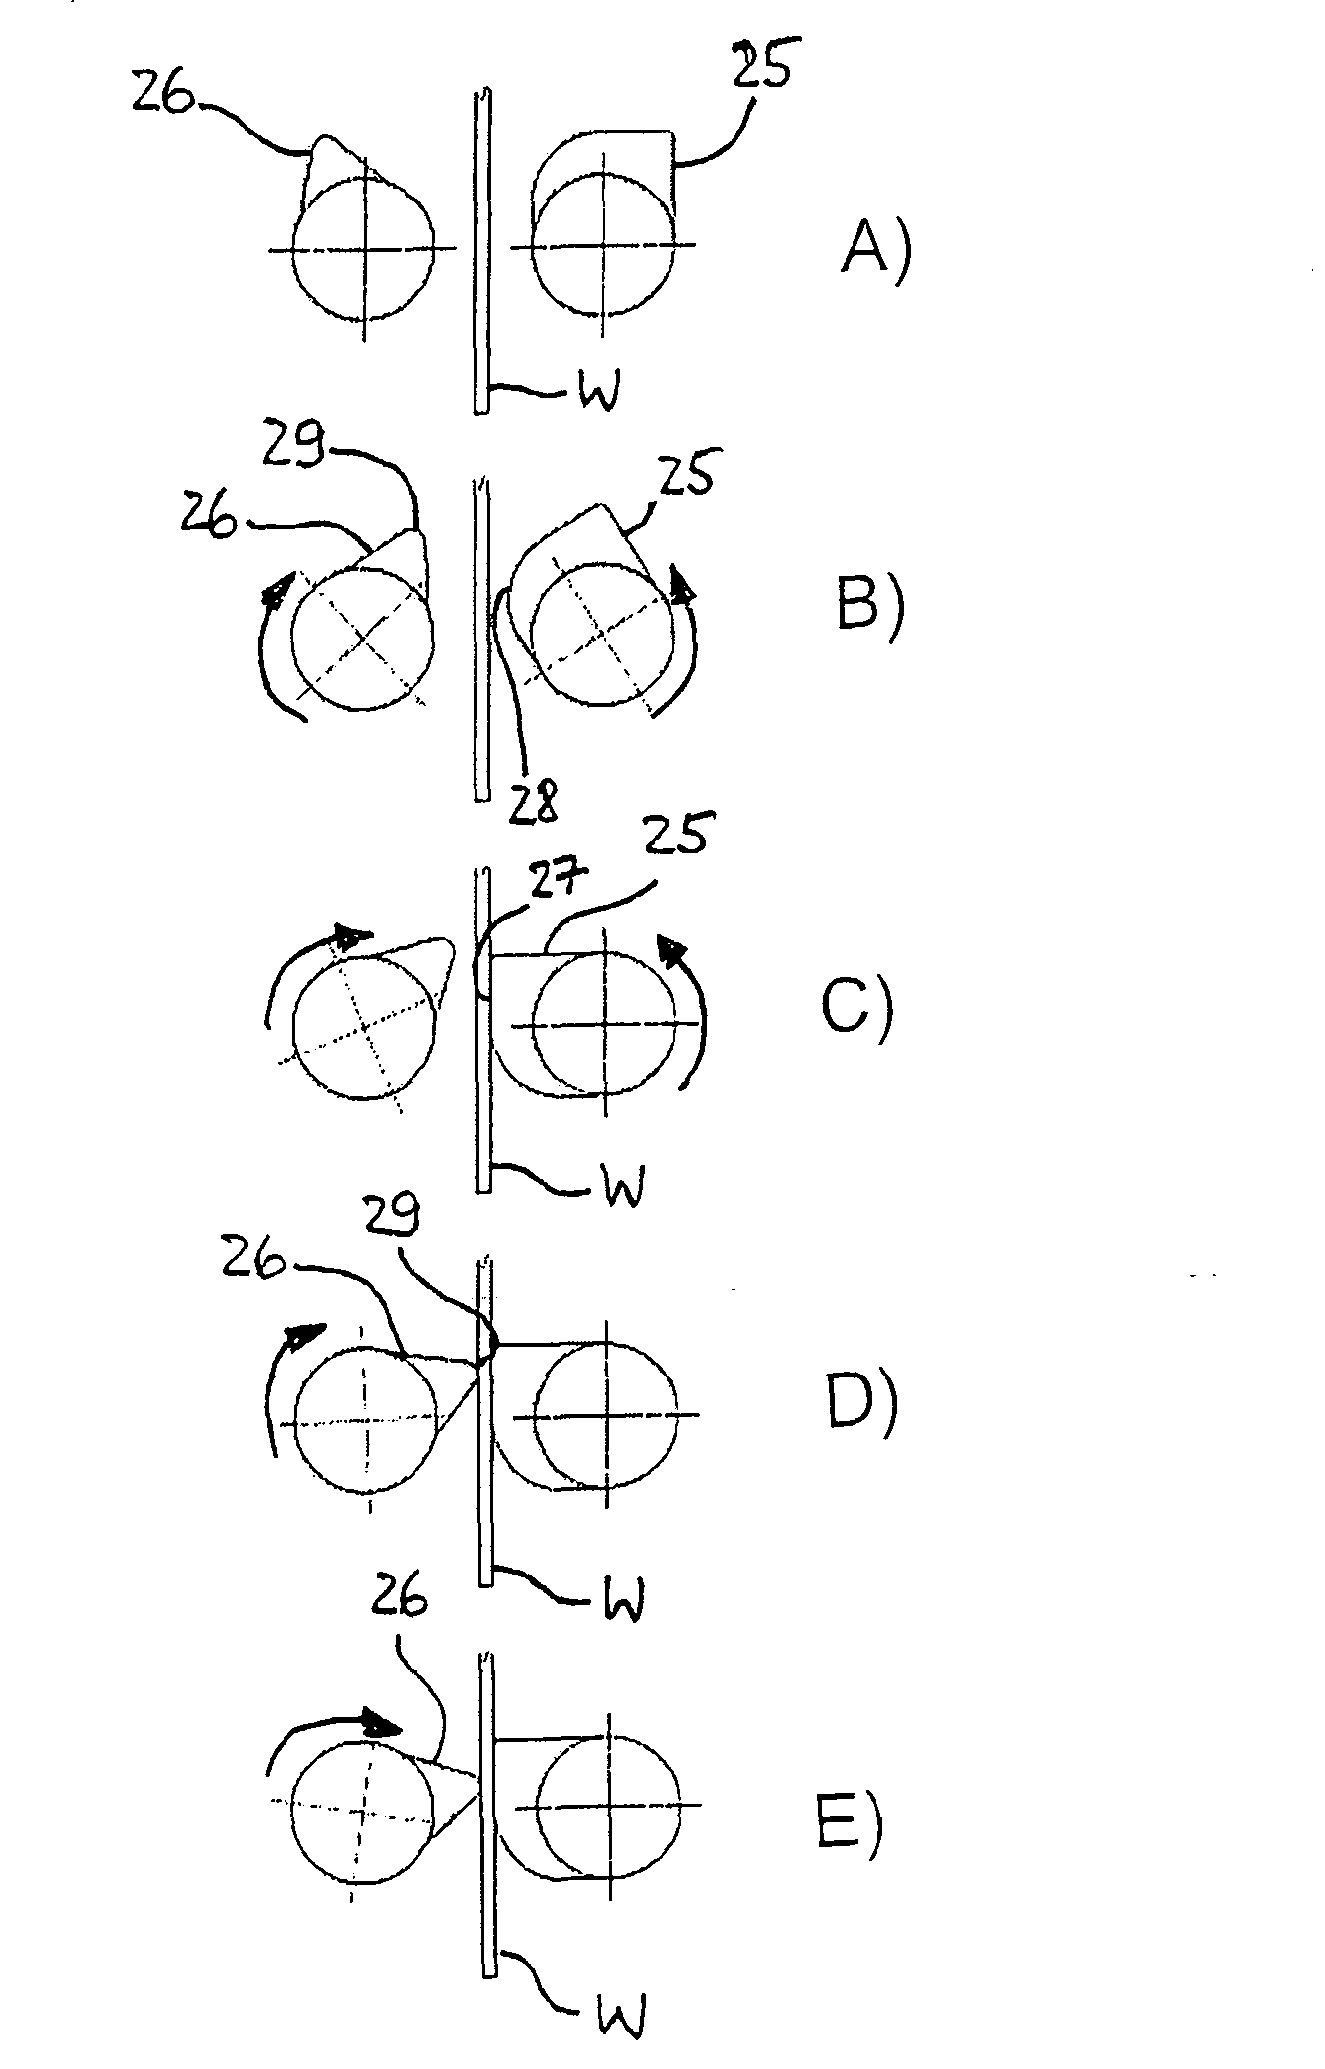 Vertical system for the plating treatment of a work piece and method for conveying the work piece